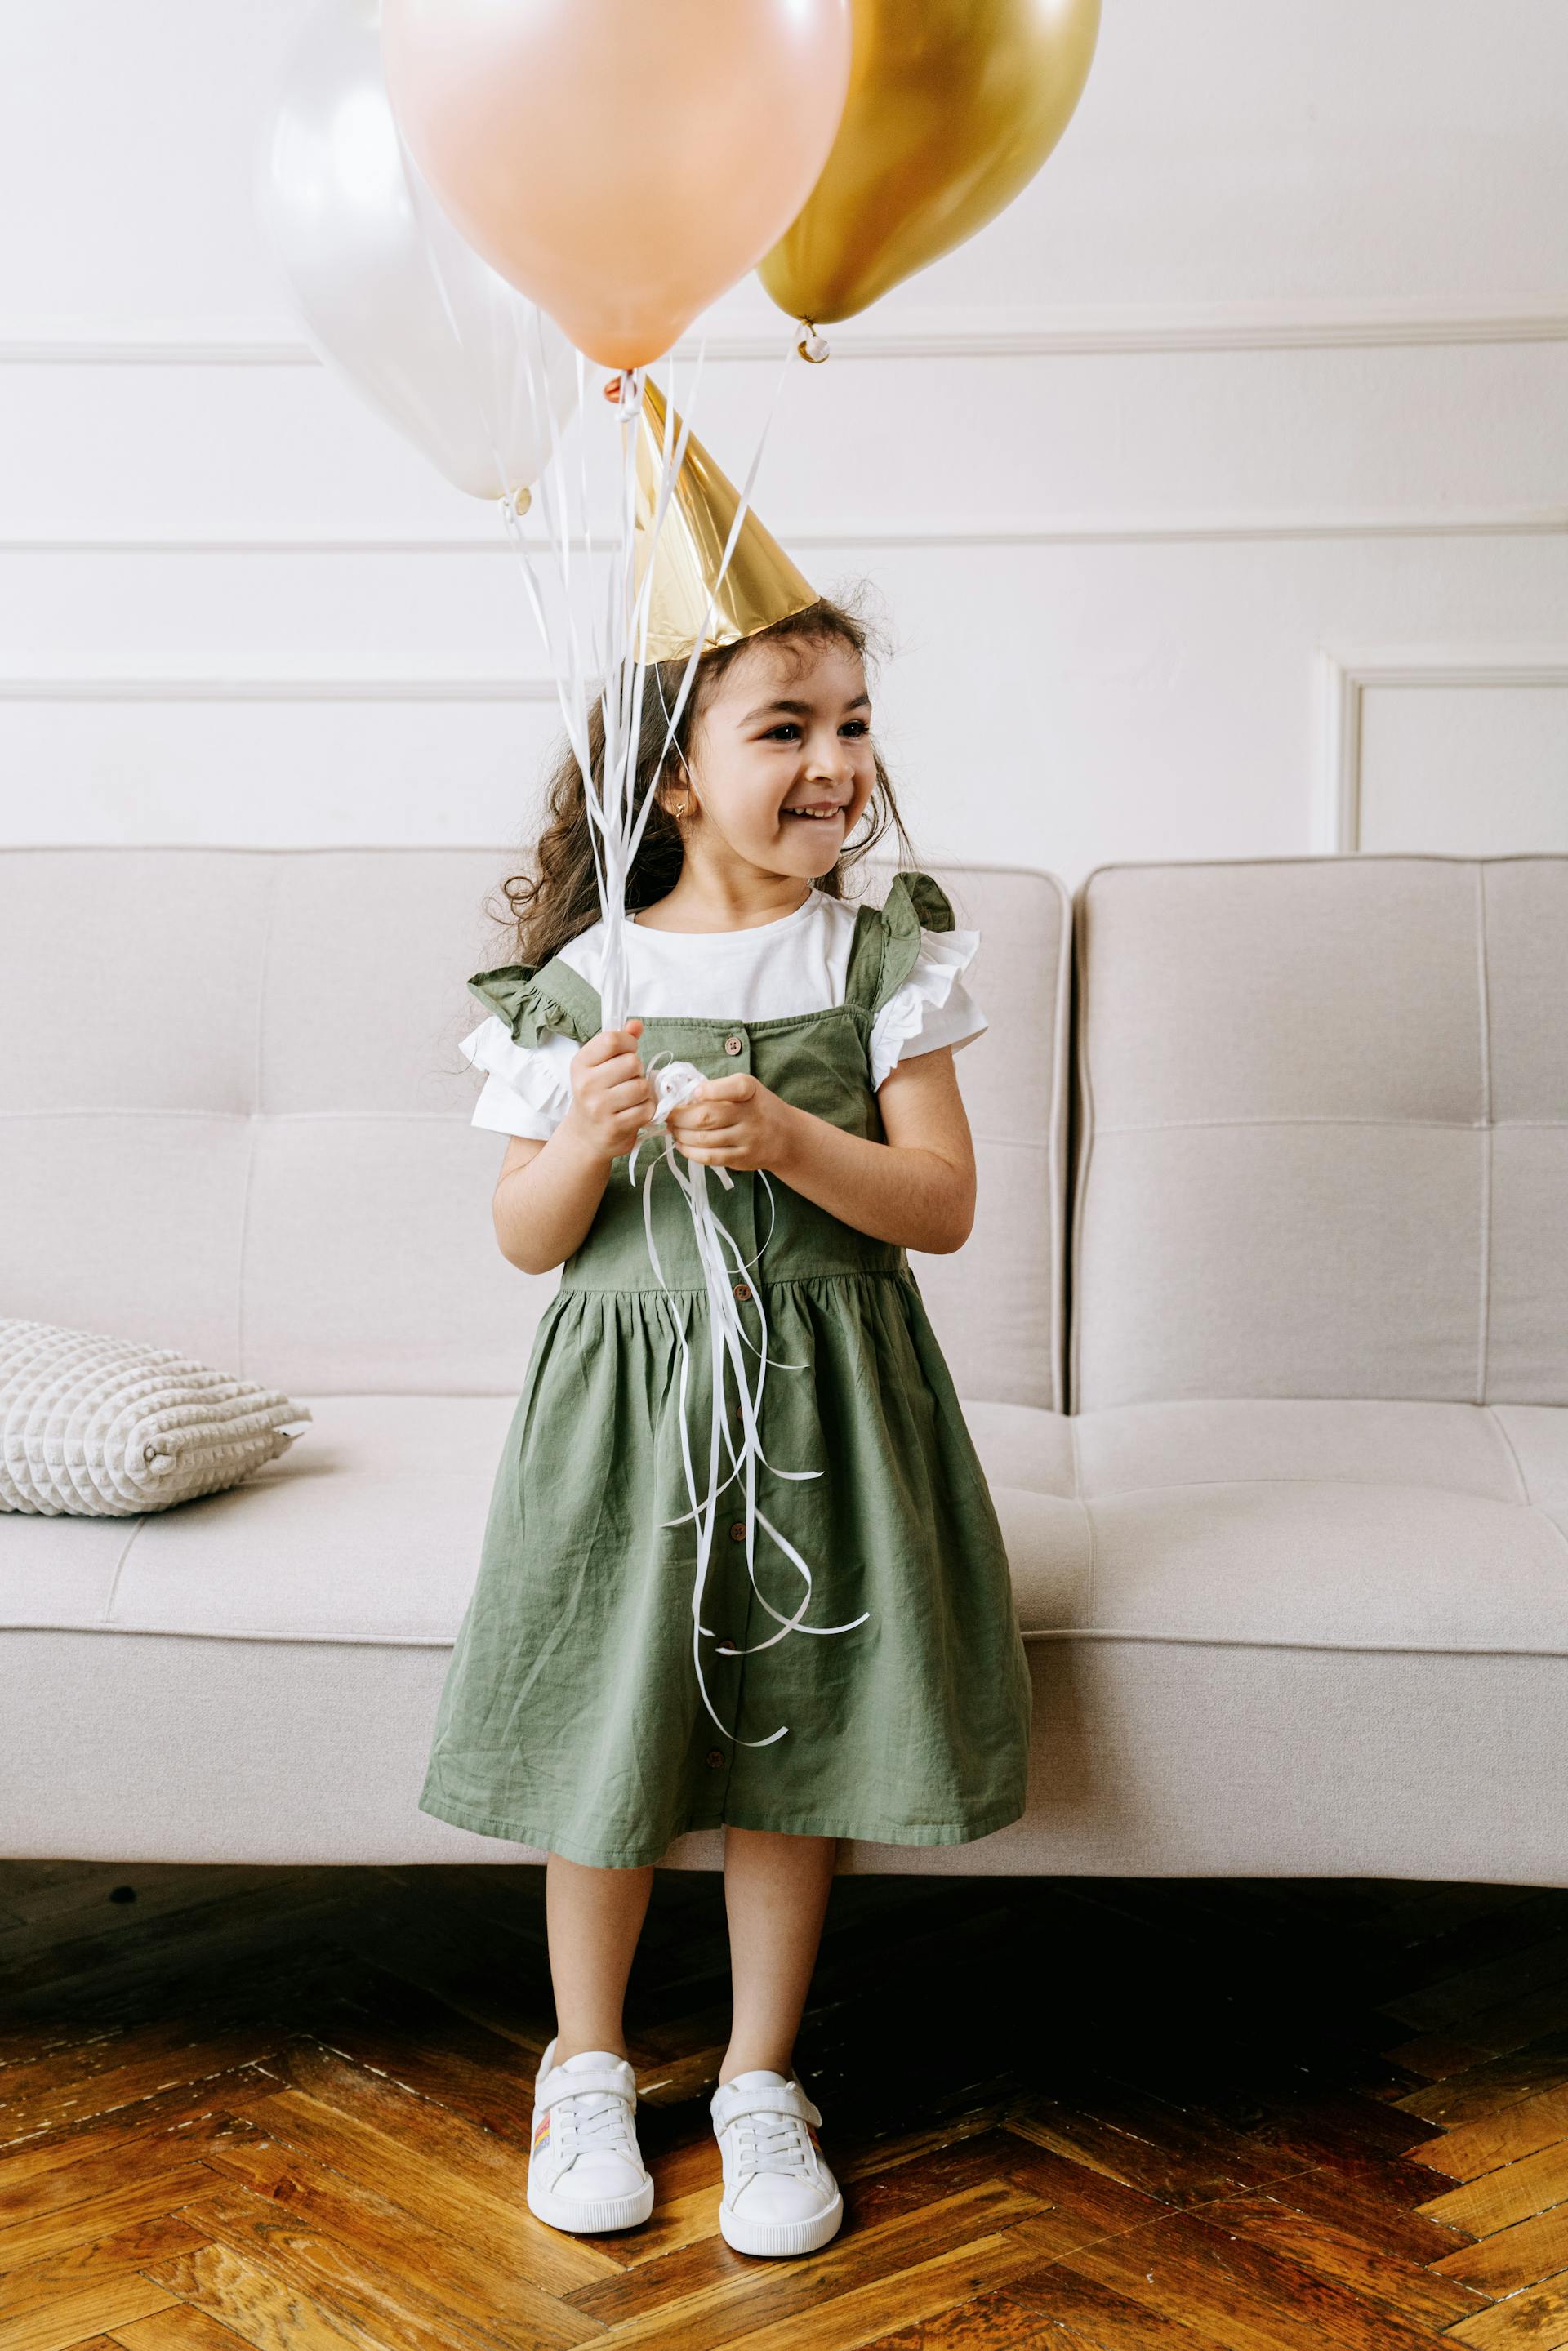 A little girl wearing a party hat while holding balloons | Source: Pexels